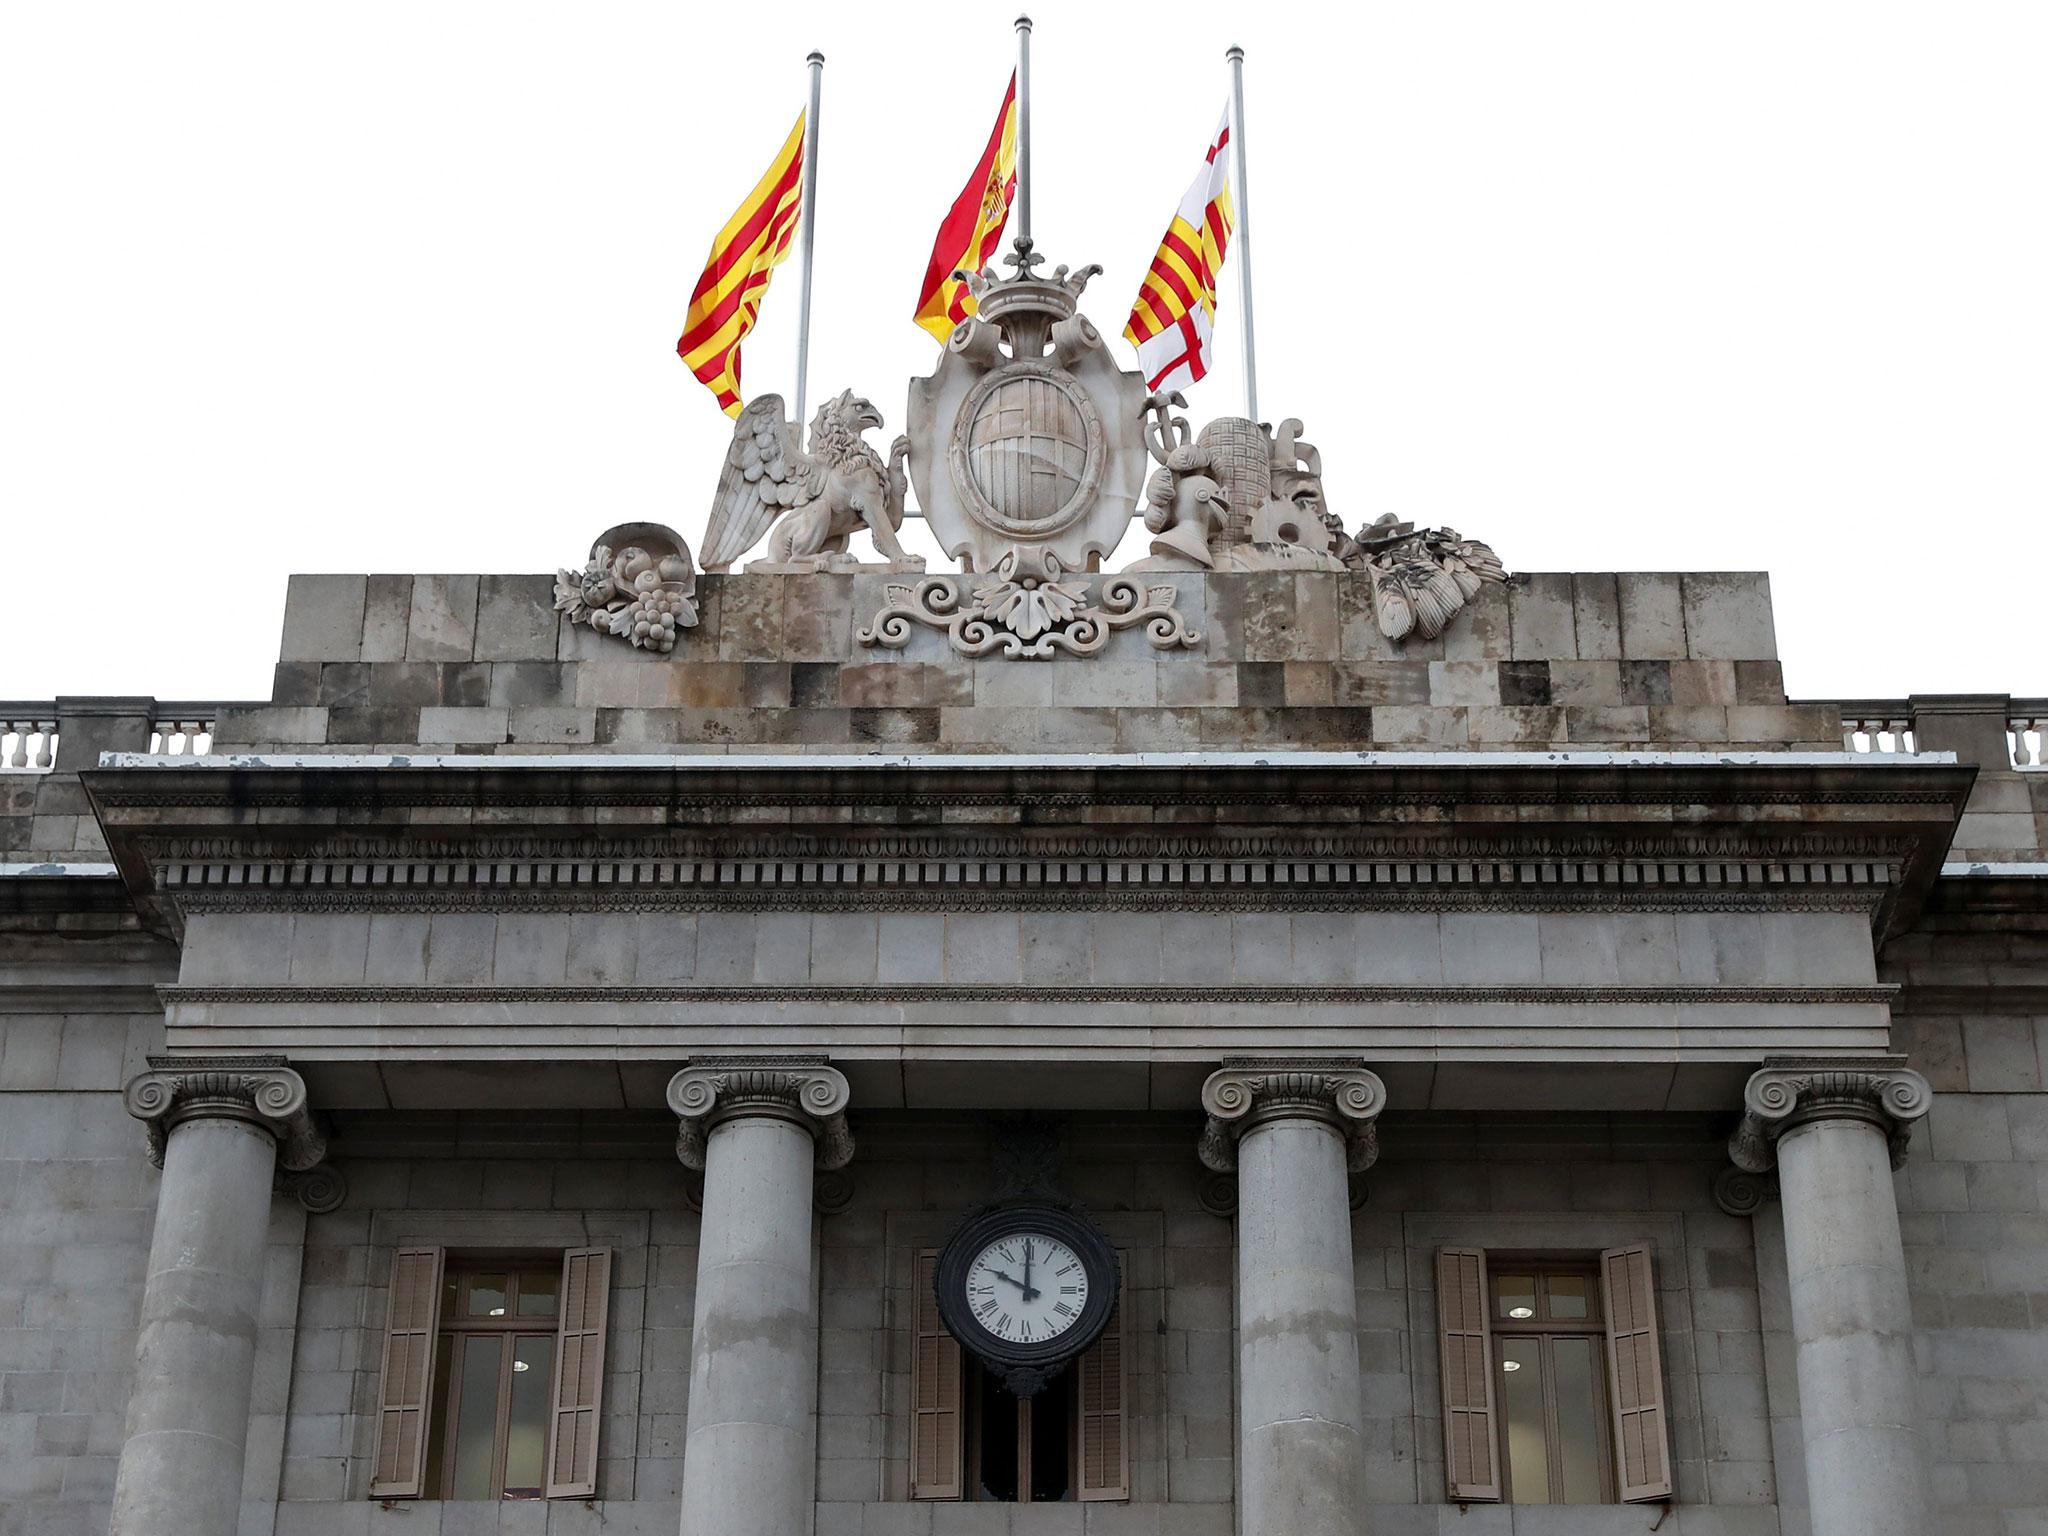 The regional government headquarters, the Generalitat, at ten o’clock: the final deadline set by Spain’s government for Catalan President Carles Puigdemont to retract an ambiguous independence declaration